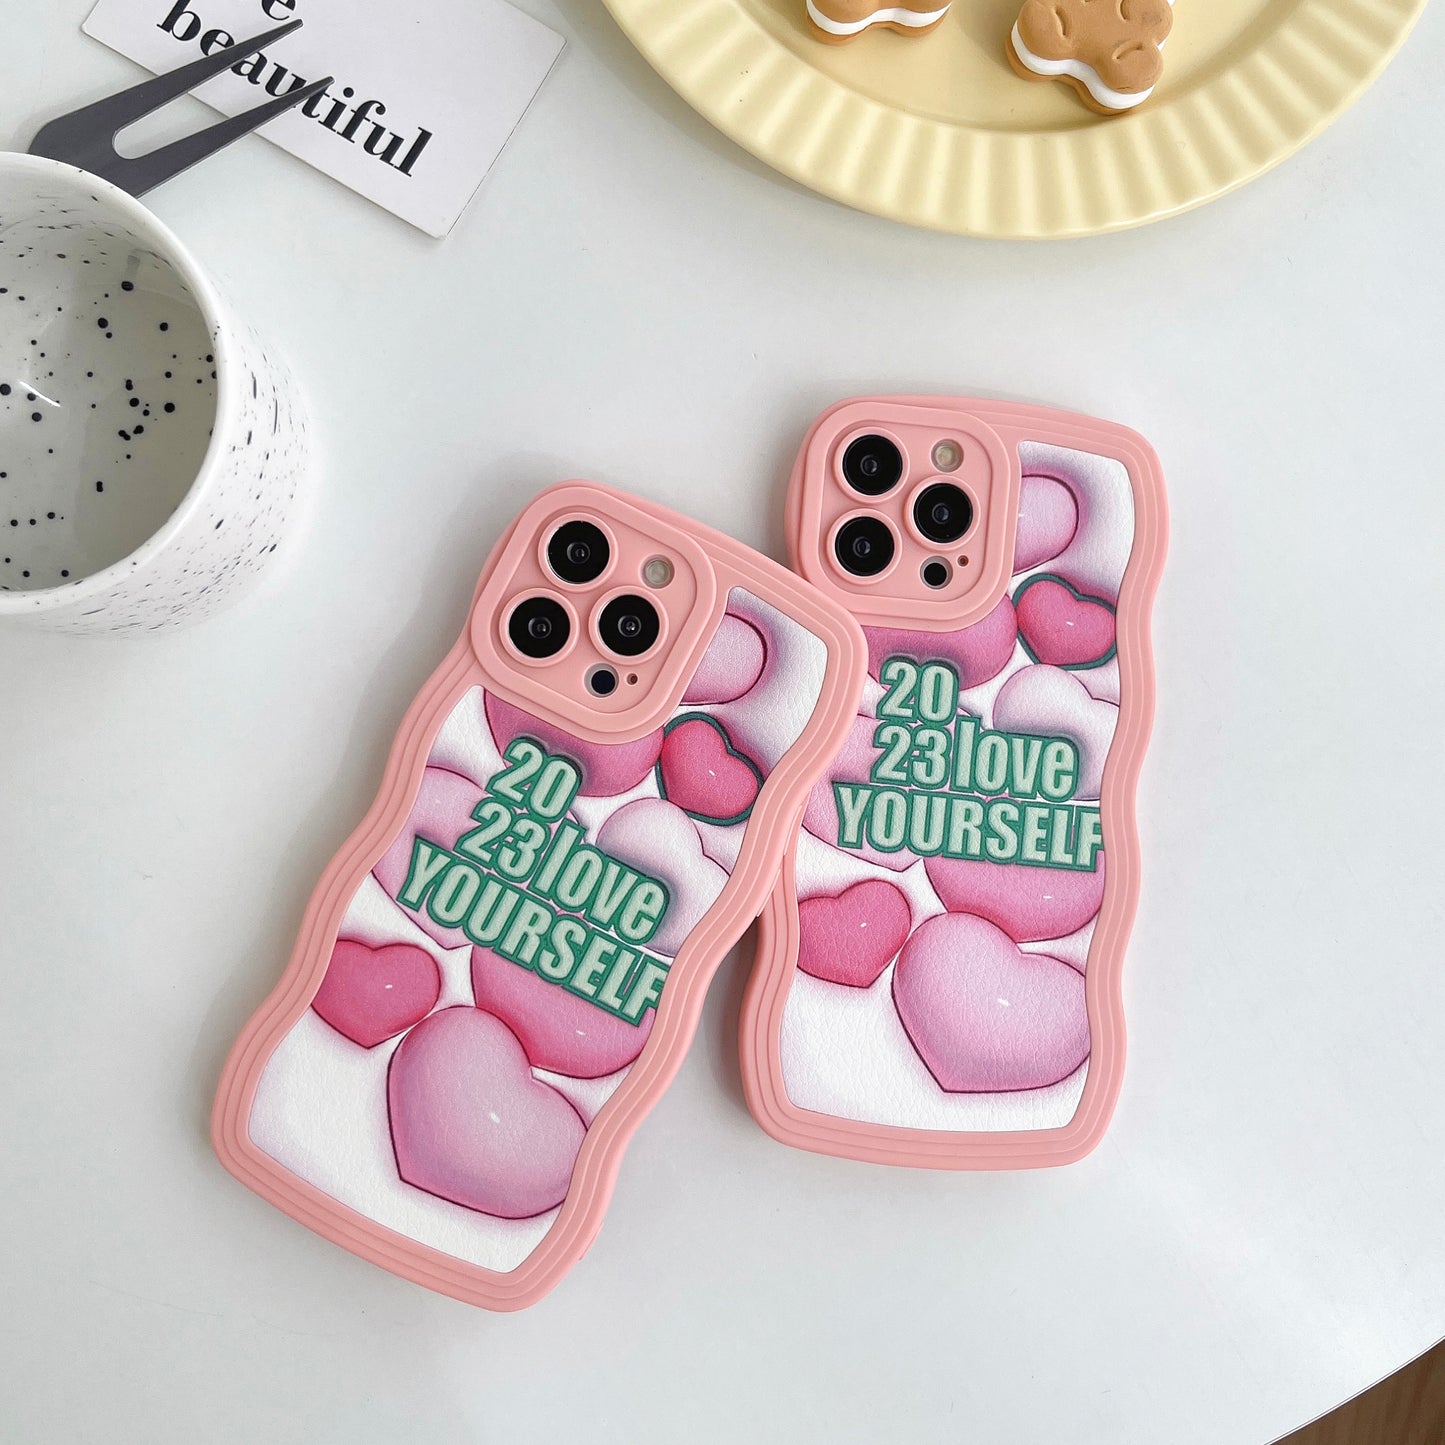 Ins Style Wave Pattern Plane 3d Love Heart Phone Cover For Iphone 7 X Xp Xs 11 12 13 14 Plus Pro Max Case